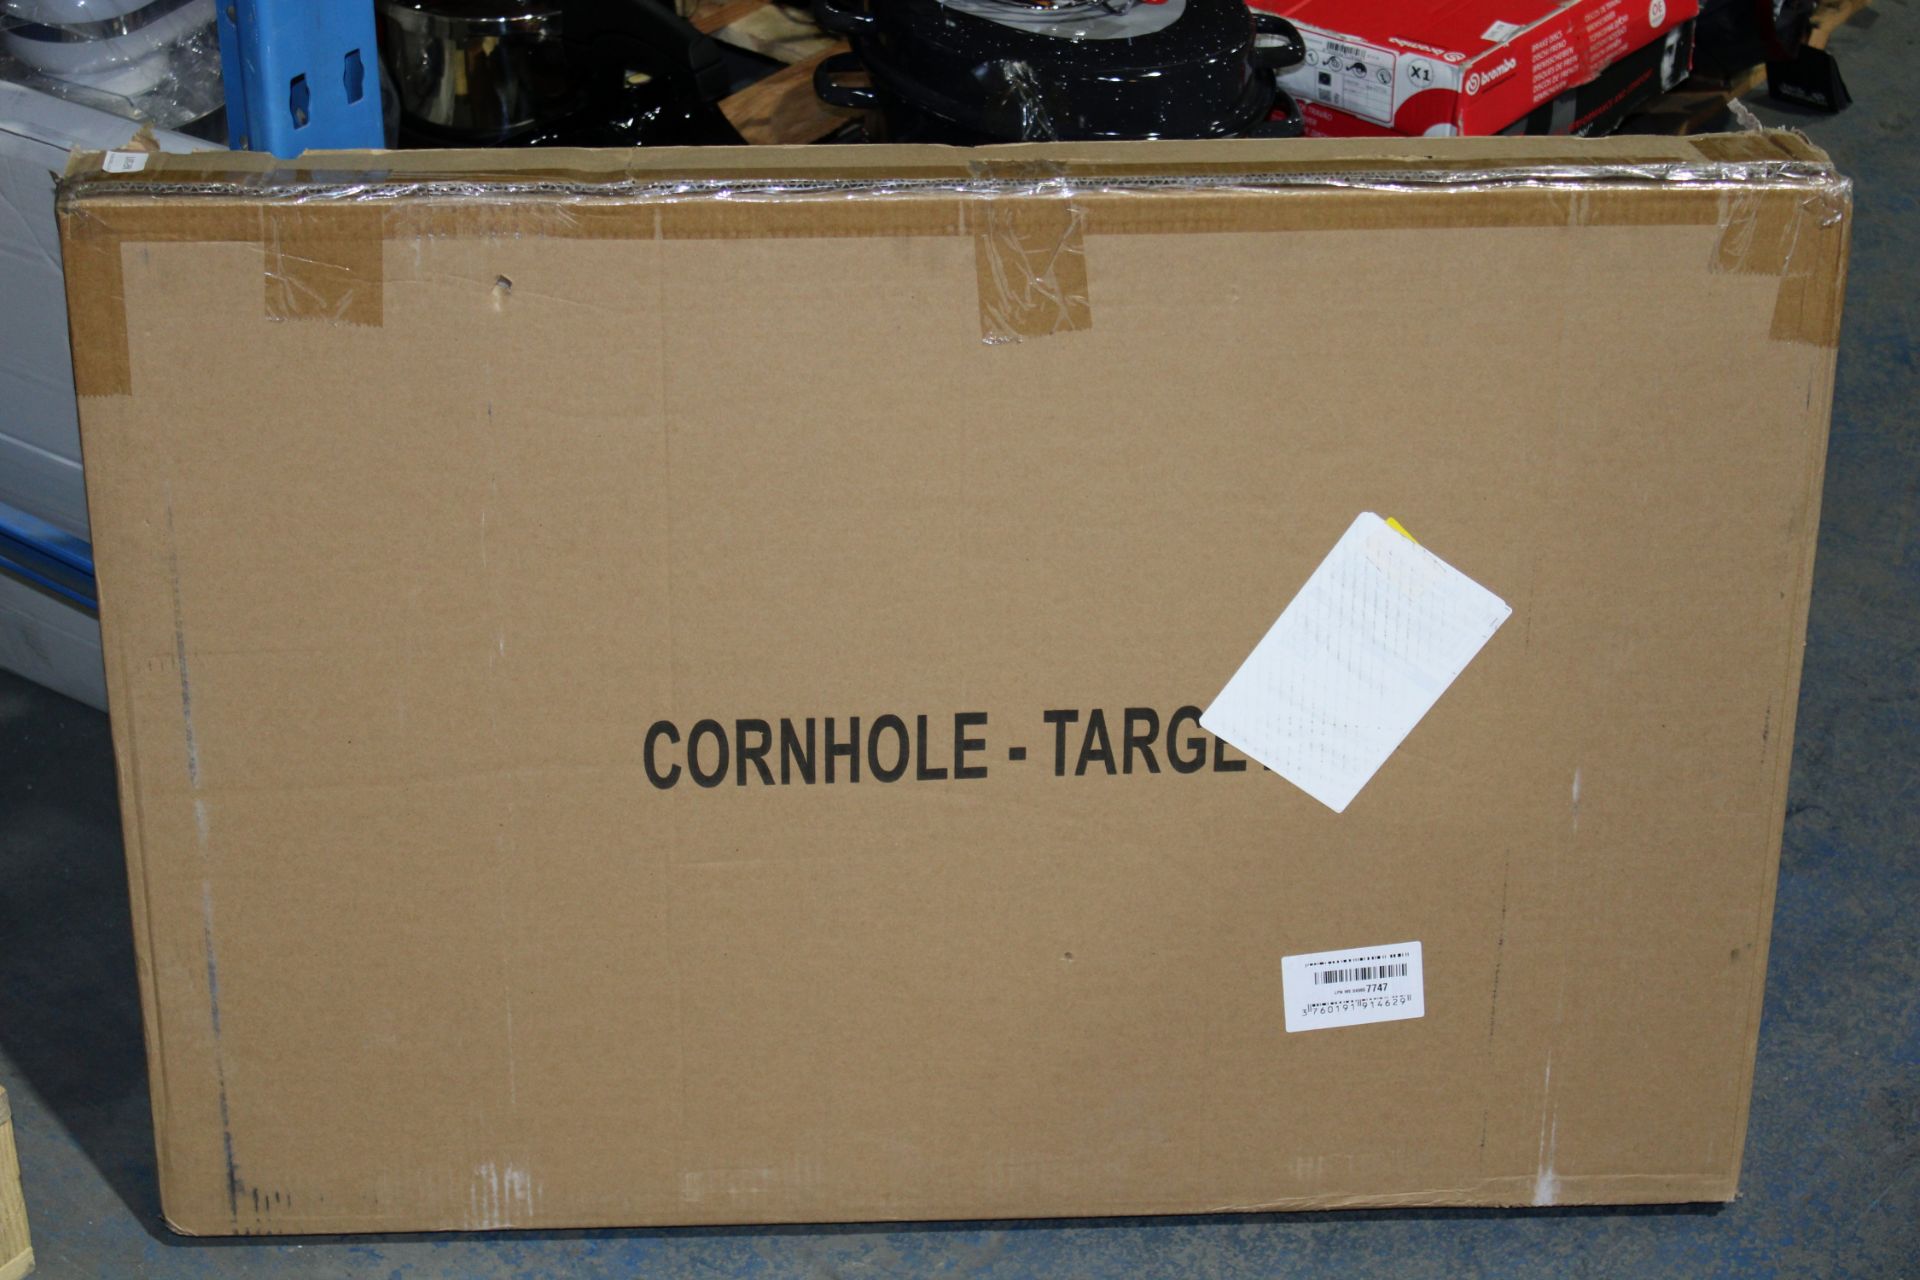 BOXED CORNHOLE TARGET Condition ReportAppraisal Available on Request- All Items are Unchecked/